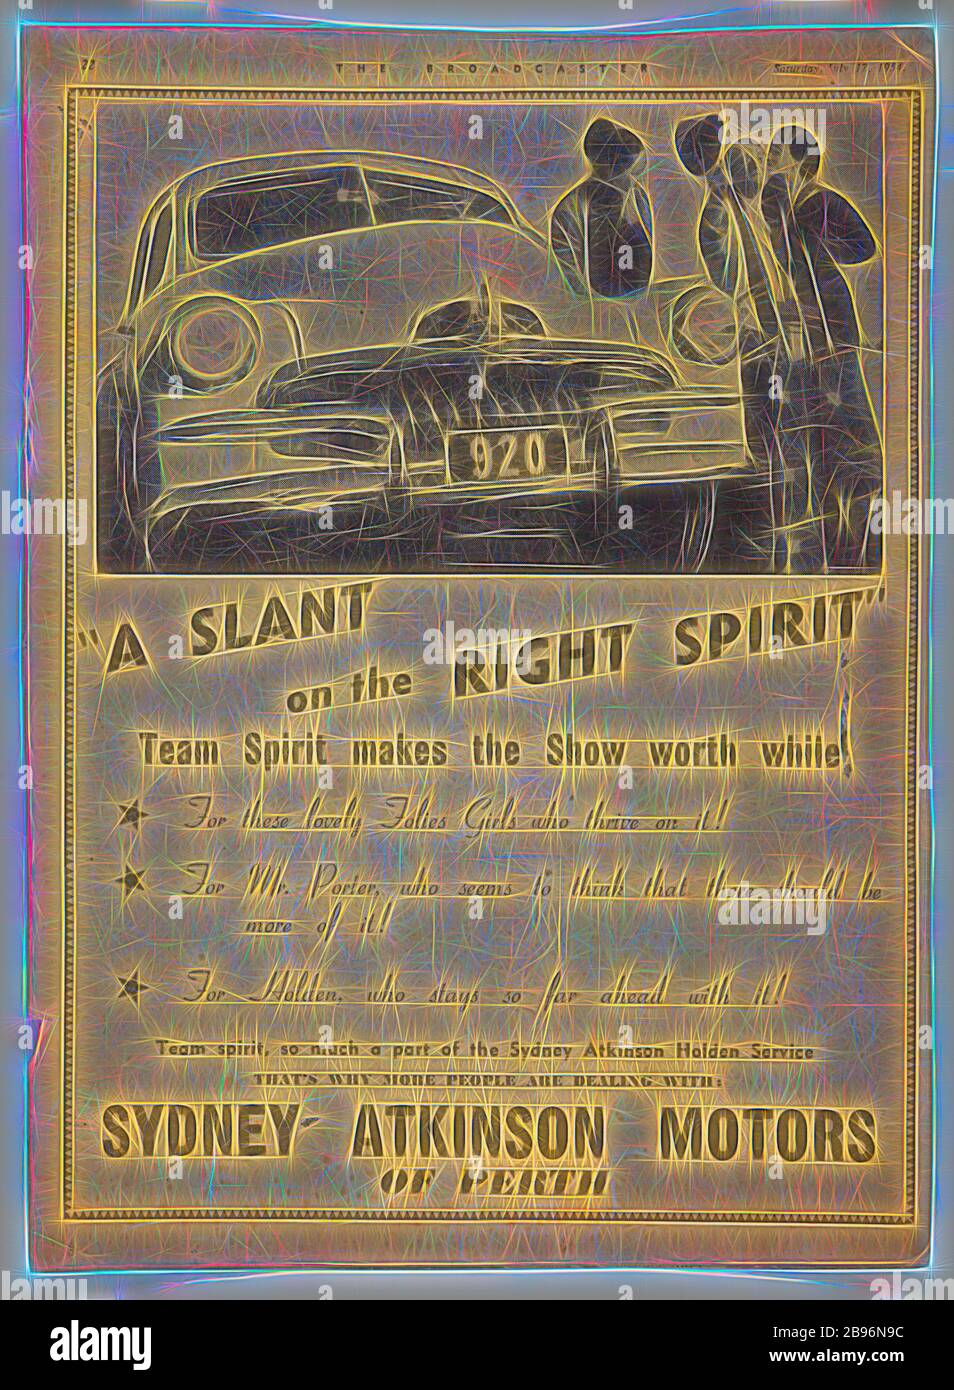 Newspaper Advertisement - Holden Cars at Sydney-Atkinson Motors, Perth, The Broadcaster, 17 Jul 1954, Clipping of an advertisement for Holden cars at Sydney-Atkinson Motors, Perth, published in The Broadcaster, 17 July 1954. One of the models is Bernice Kopple (kissing the porter) who had migrated from Scotland to Australia, in December 1950 onboard the ship New Australia'. Bernice Kopple was born in Glasgow, Scotland in 1930 and migrated to Melbourne onboard the ship New Australia in 1950., Reimagined by Gibon, design of warm cheerful glowing of brightness and light rays radiance. Classic art Stock Photo